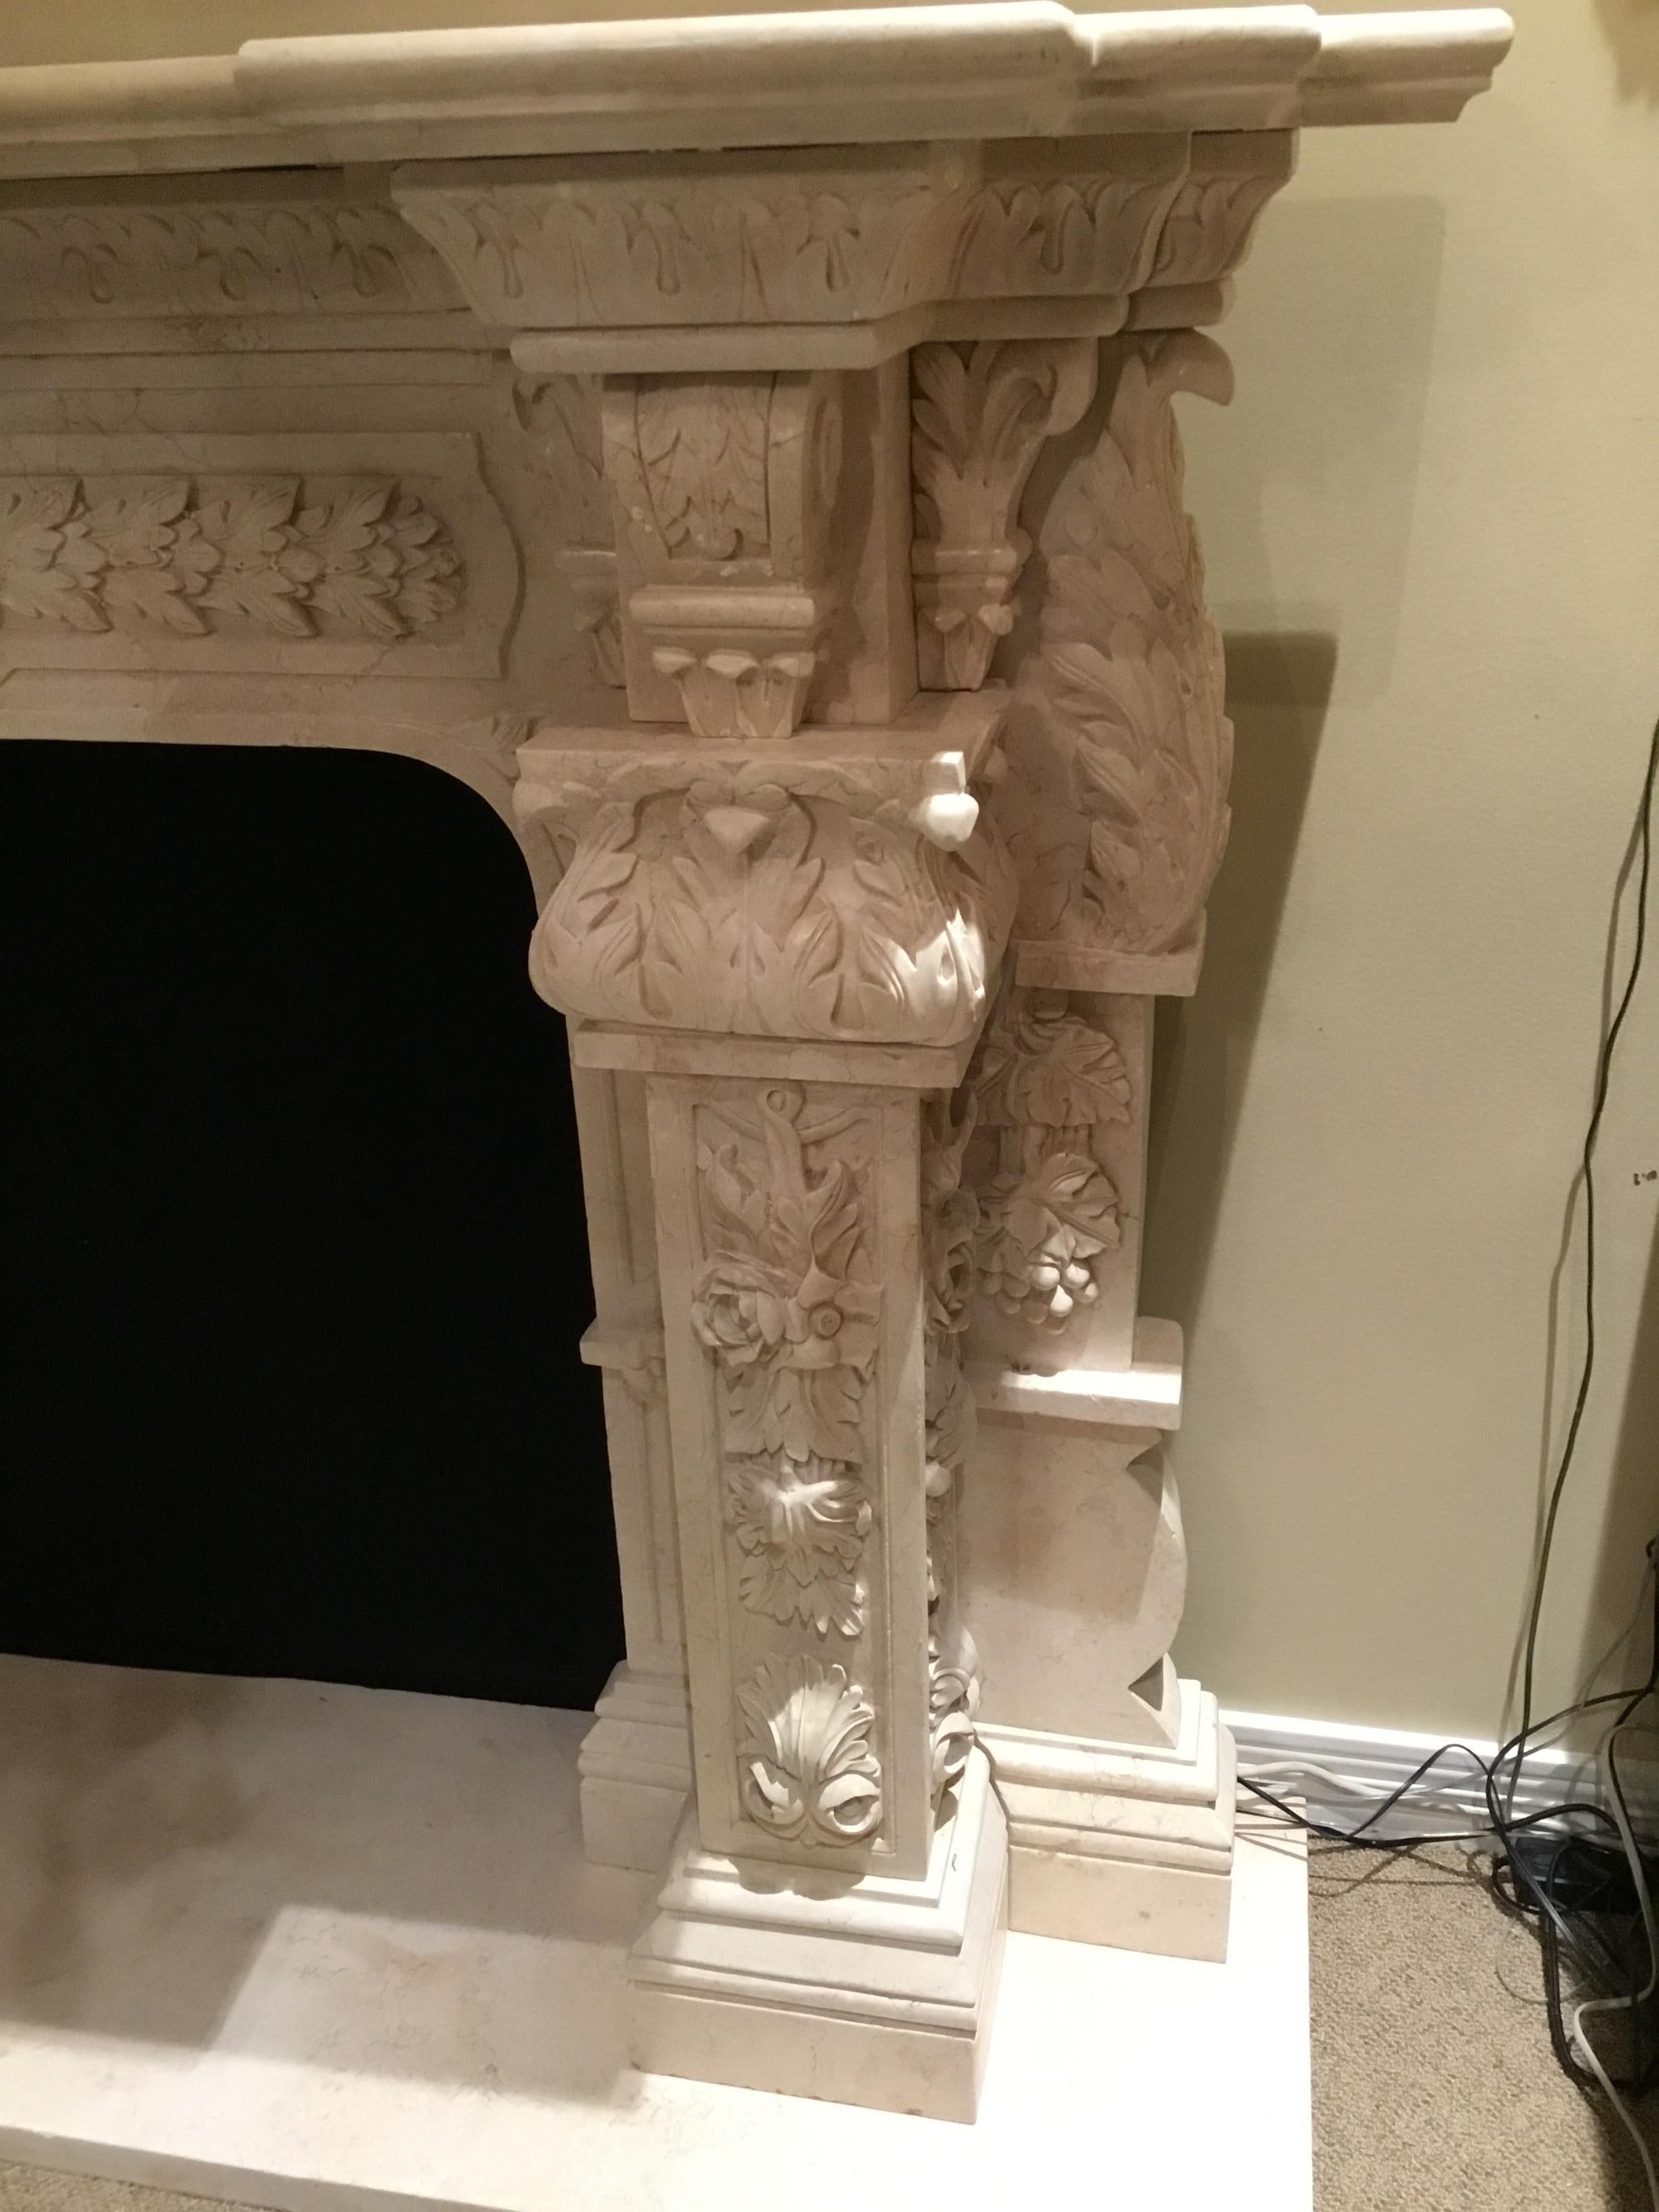 Exceptional carved mantel in cream colored hue. Deep and intricate detail with floral and foliate
Designs. The inside measurements are 34” W by 38” H. This mantel is in the gallery to view and
Ready to ship to your construction site.